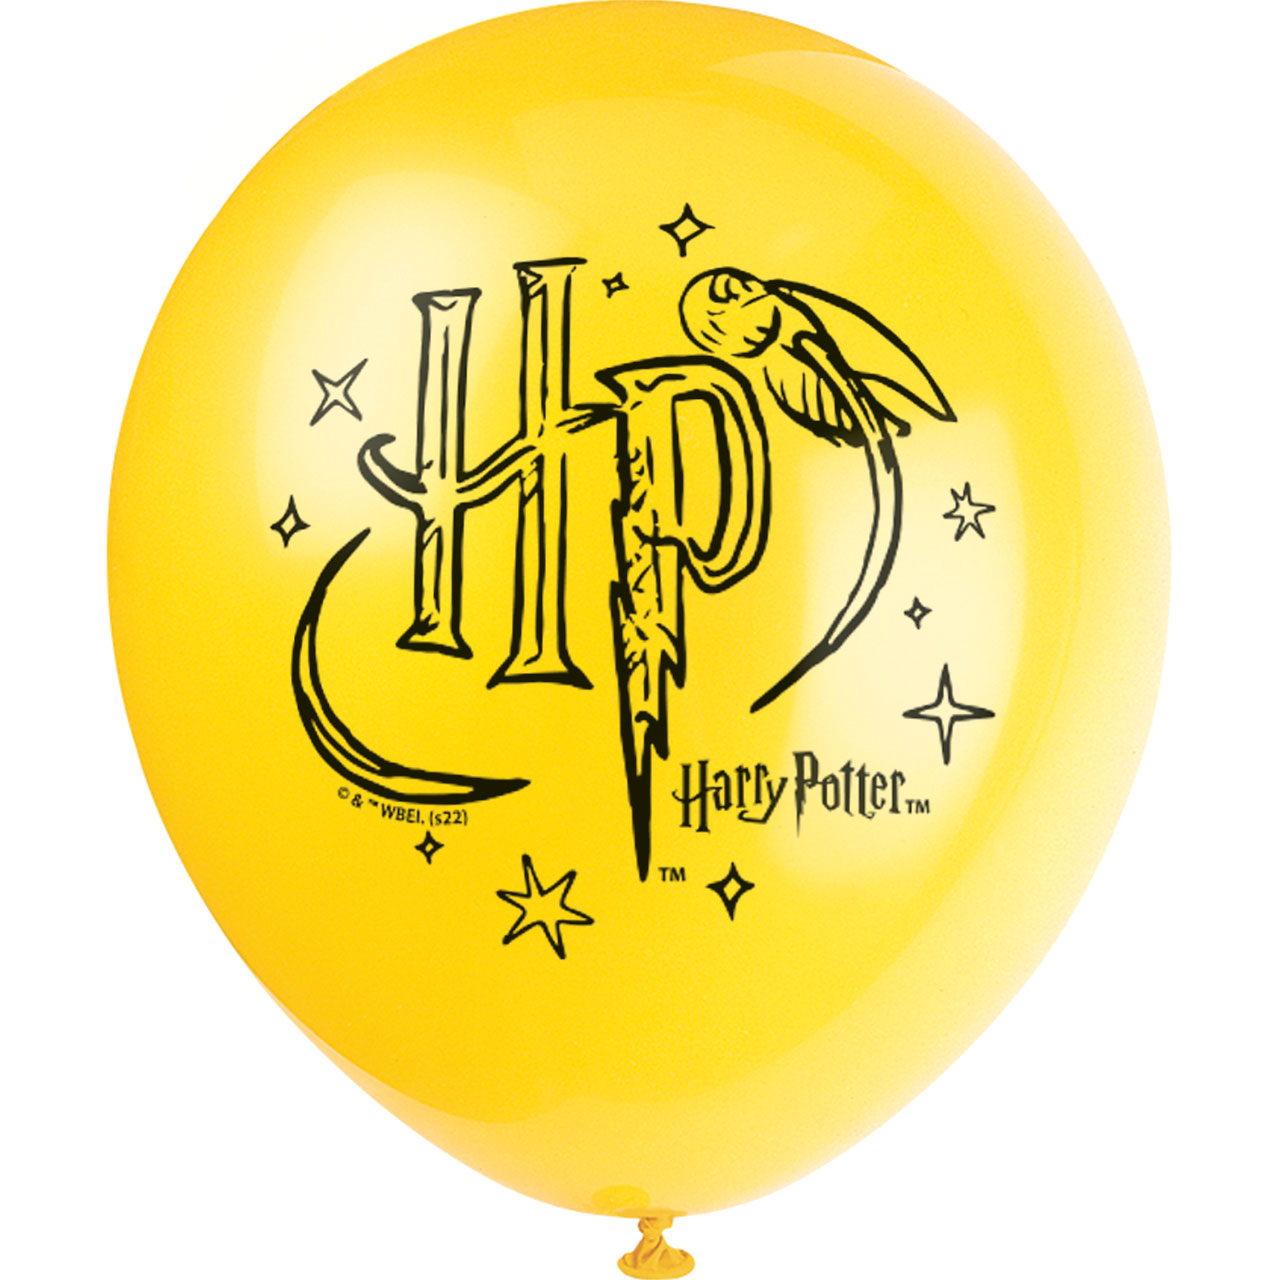 8 Ballons Harry Potter Party